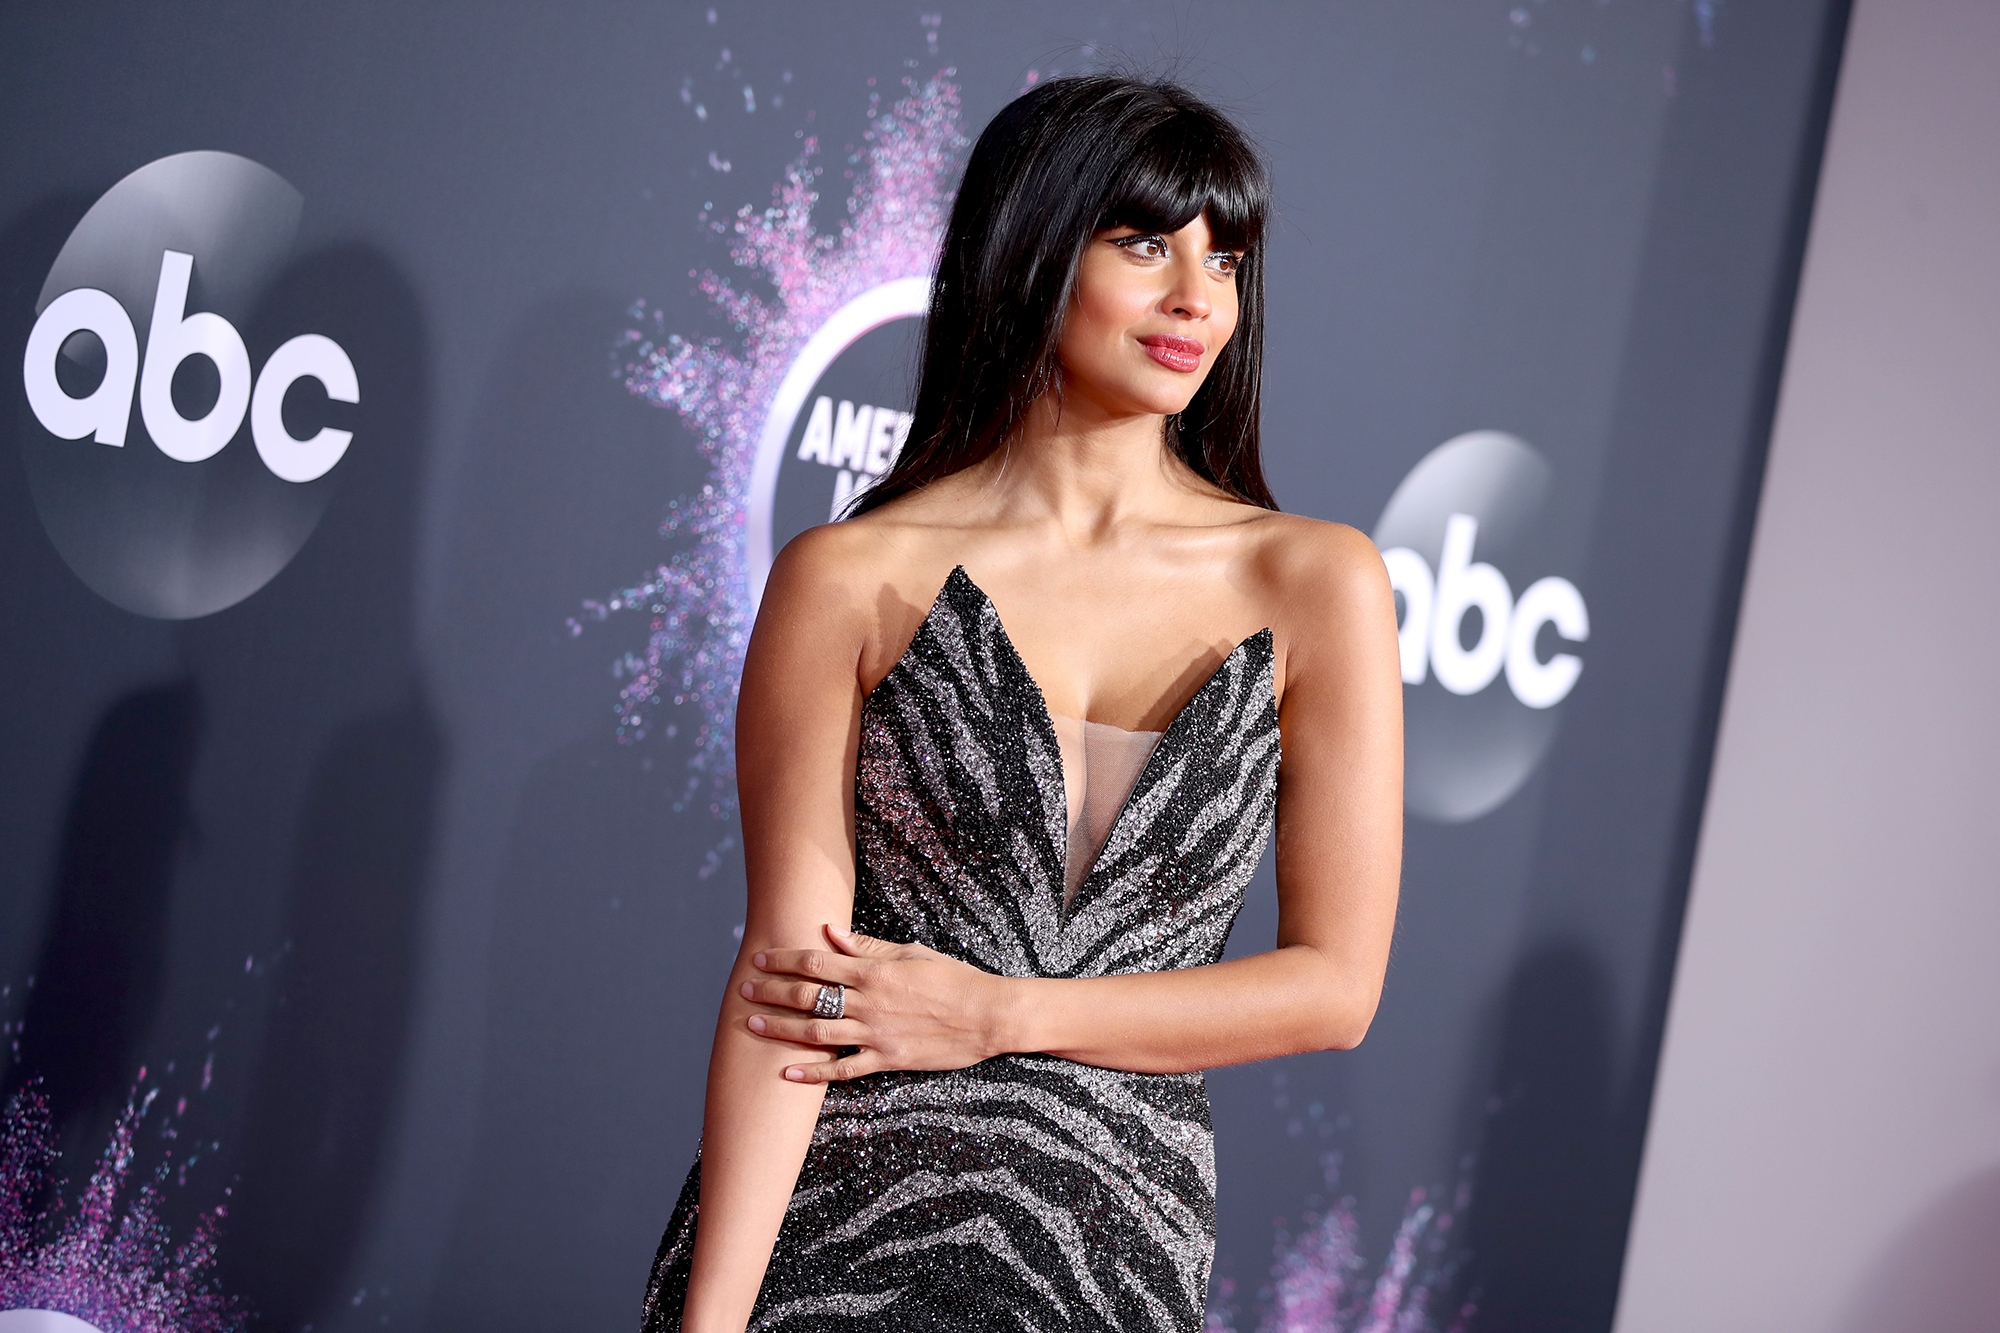 The Good Place' star Jameela Jamil says she identifies as queer.